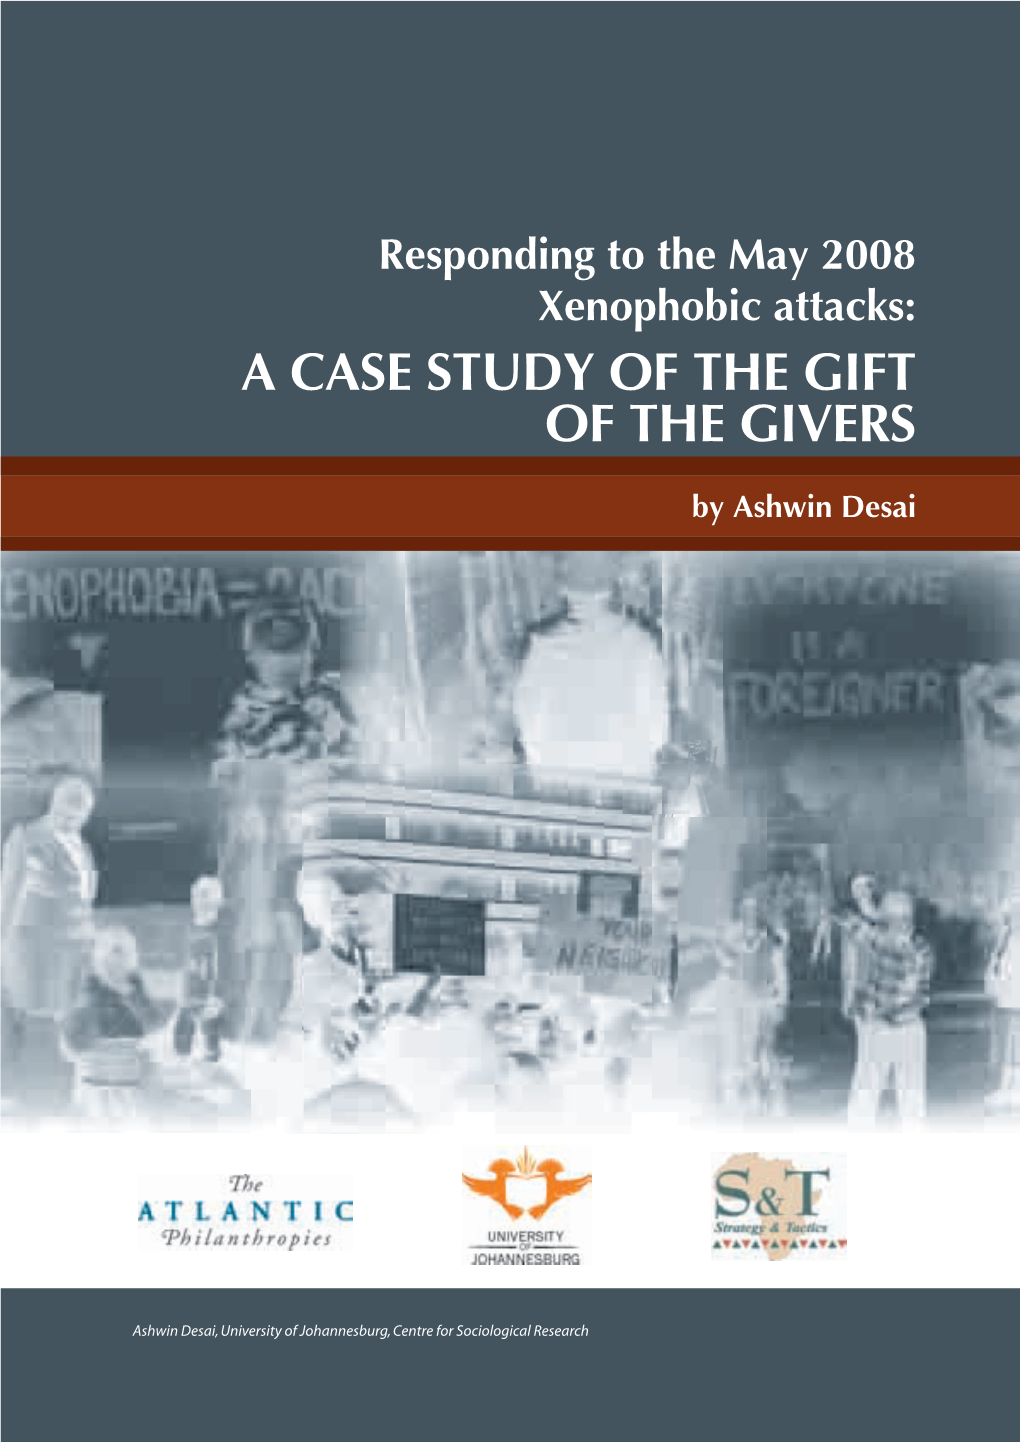 A Case Study of the Gift of the Givers